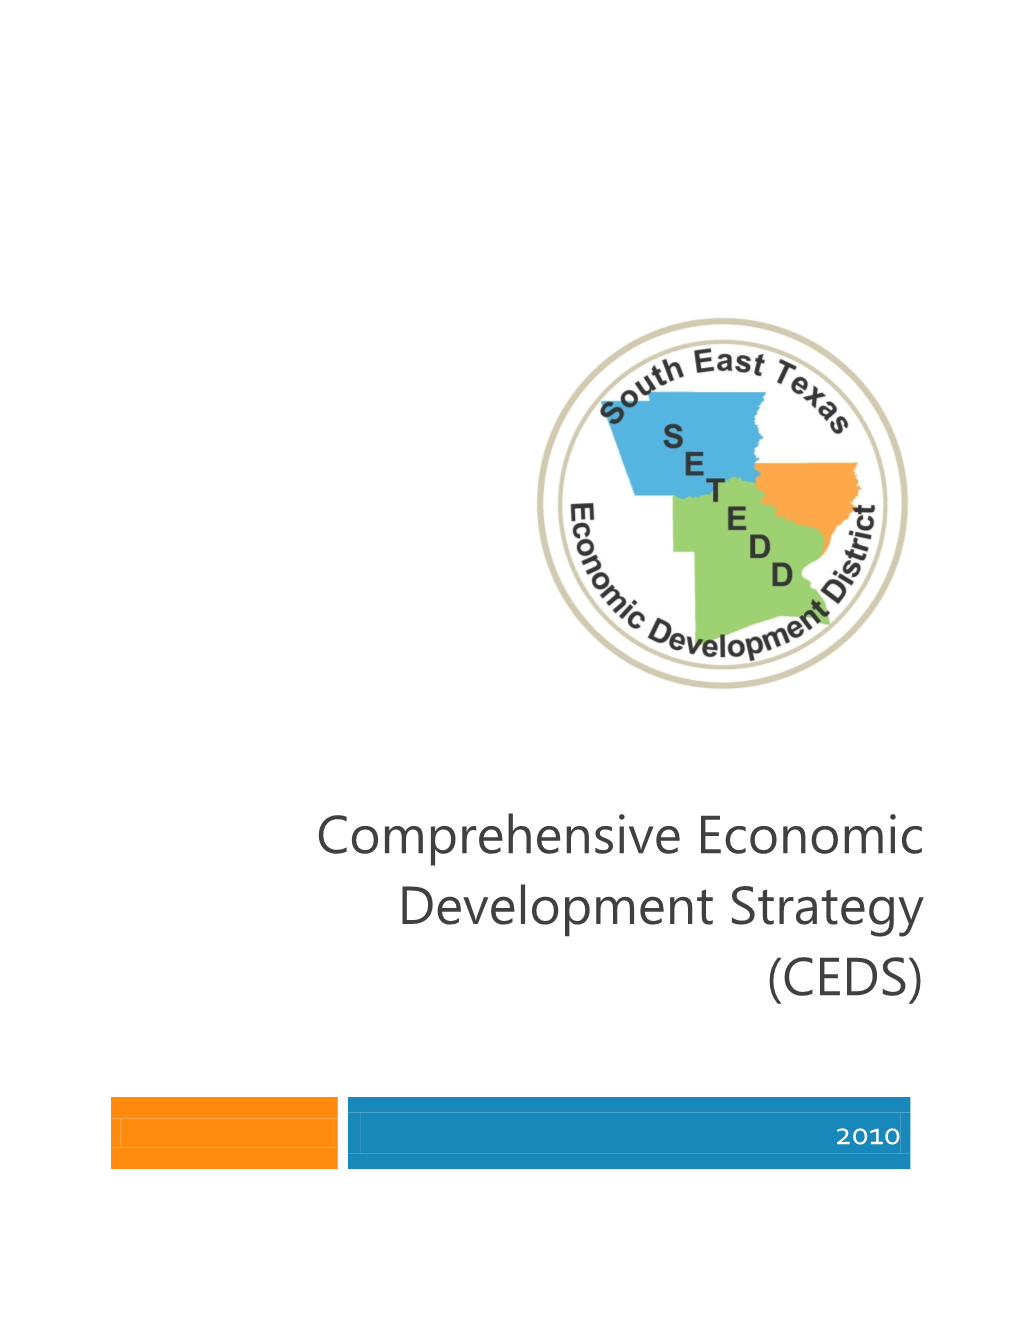 Comprehensive Economic Development Strategy (CEDS) Is the Result of a Local Planning Process Designed to Guide the Growth of the Southeast Texas Region